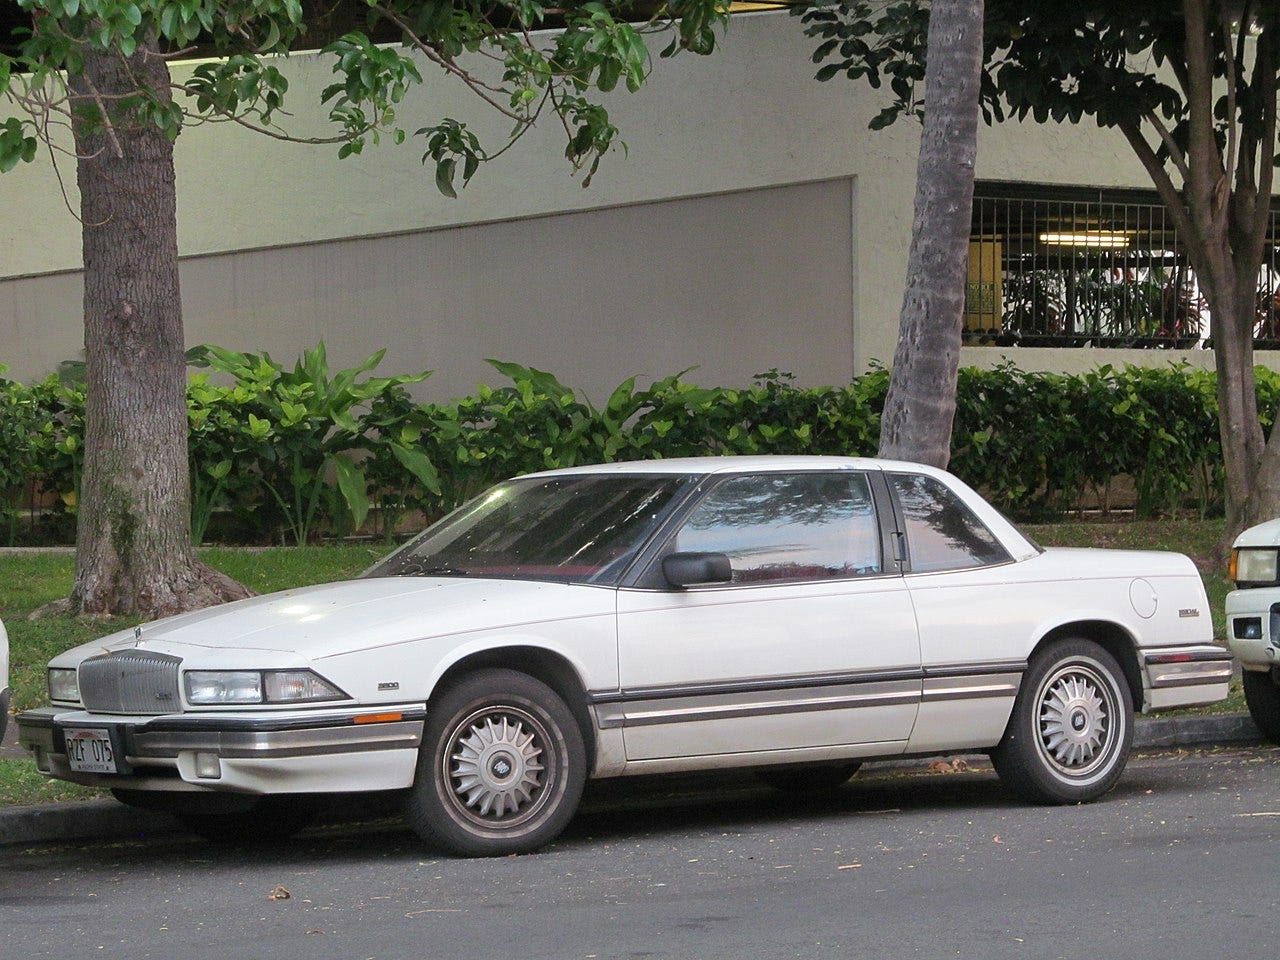 File:1991 Buick Regal Limited Coupe (29497345741).jpg - Wikipedia